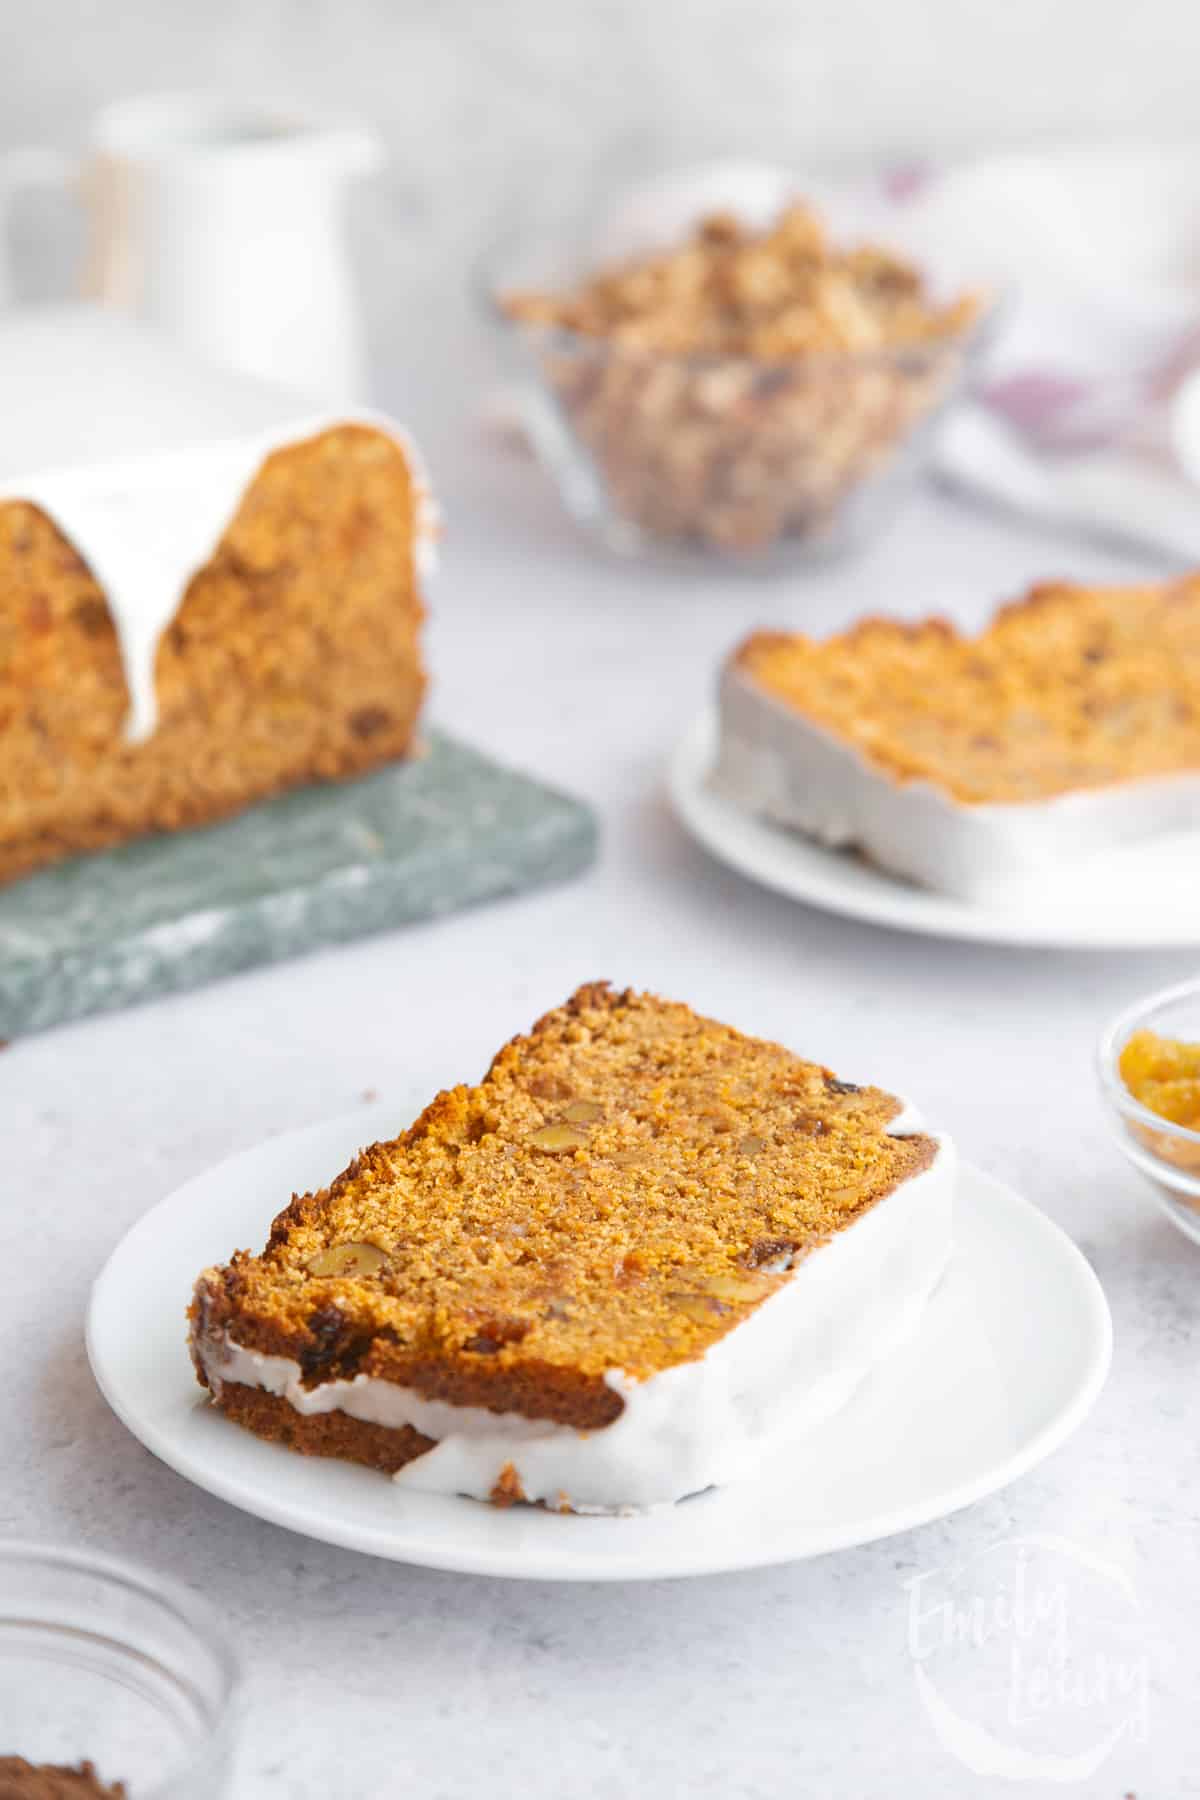 a slice of Vegan carrot loaf cake on a white plate with the full loaf in the background.